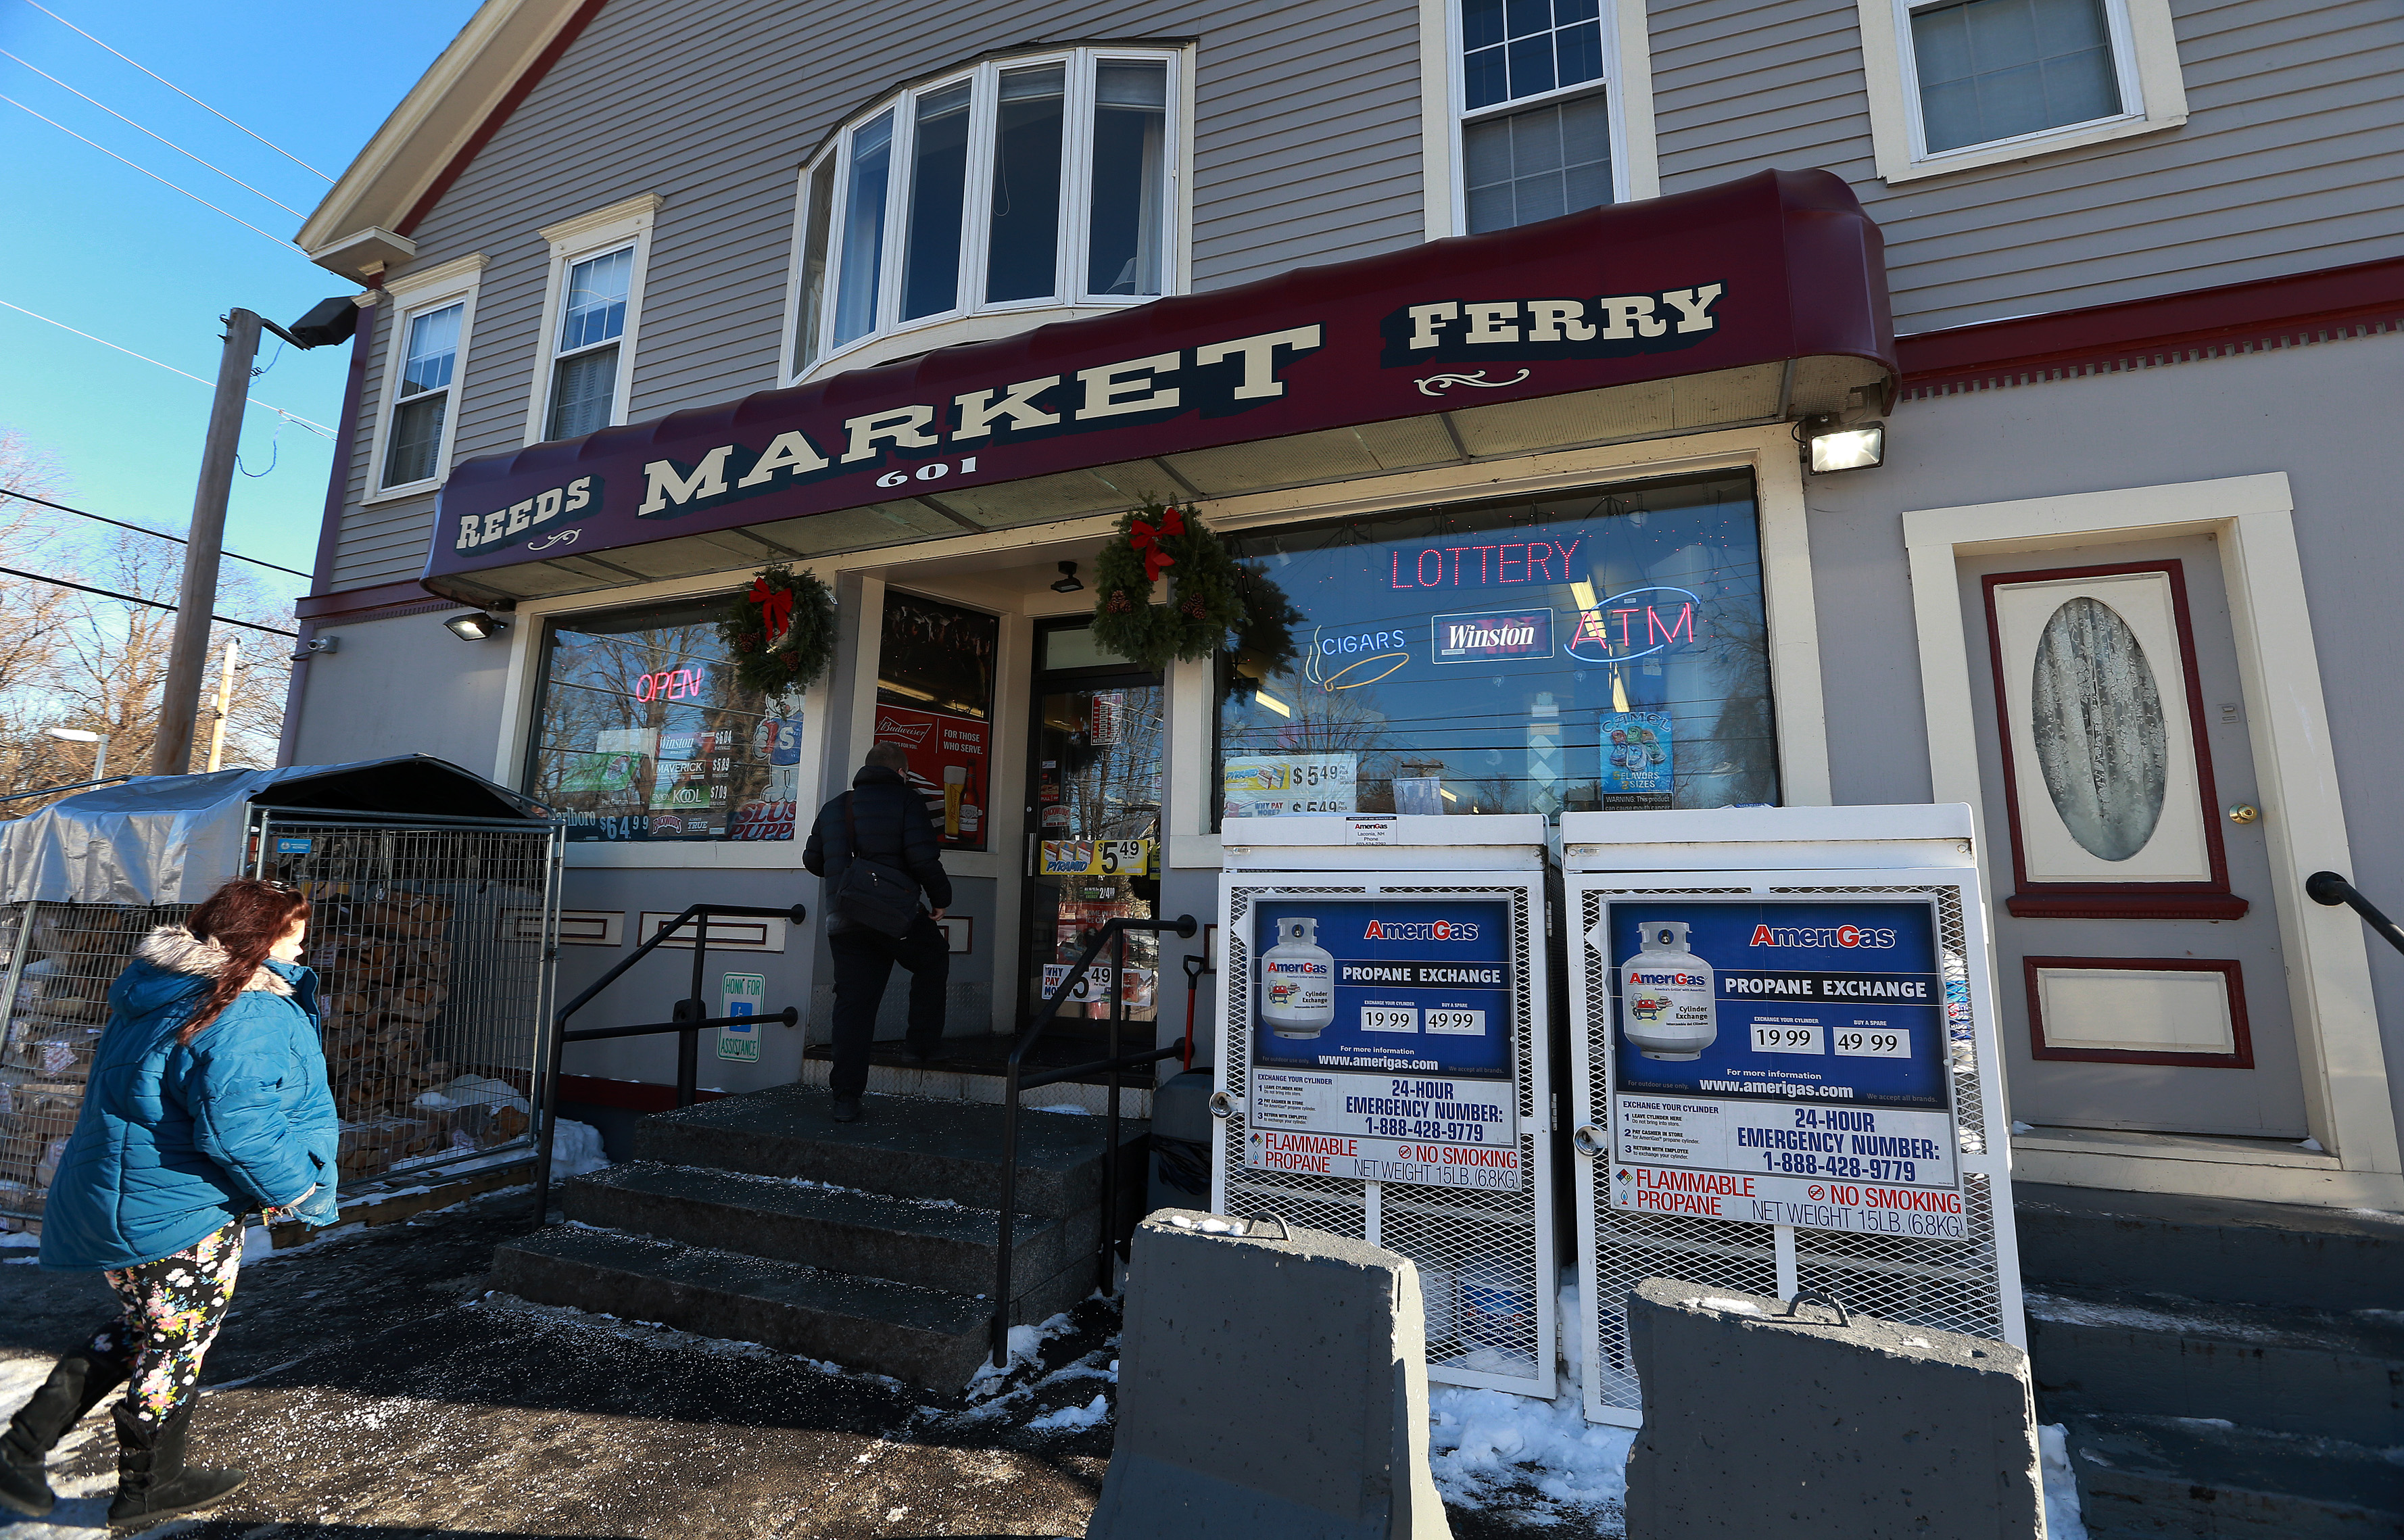 The exterior of Reeds Ferry Market in Merrimack, NH, where the lone winning ticket in a $559.7 million Powerball drawing was sold, is pictured on Jan. 7, 2018. (Boston Globe—Boston Globe via Getty Images)